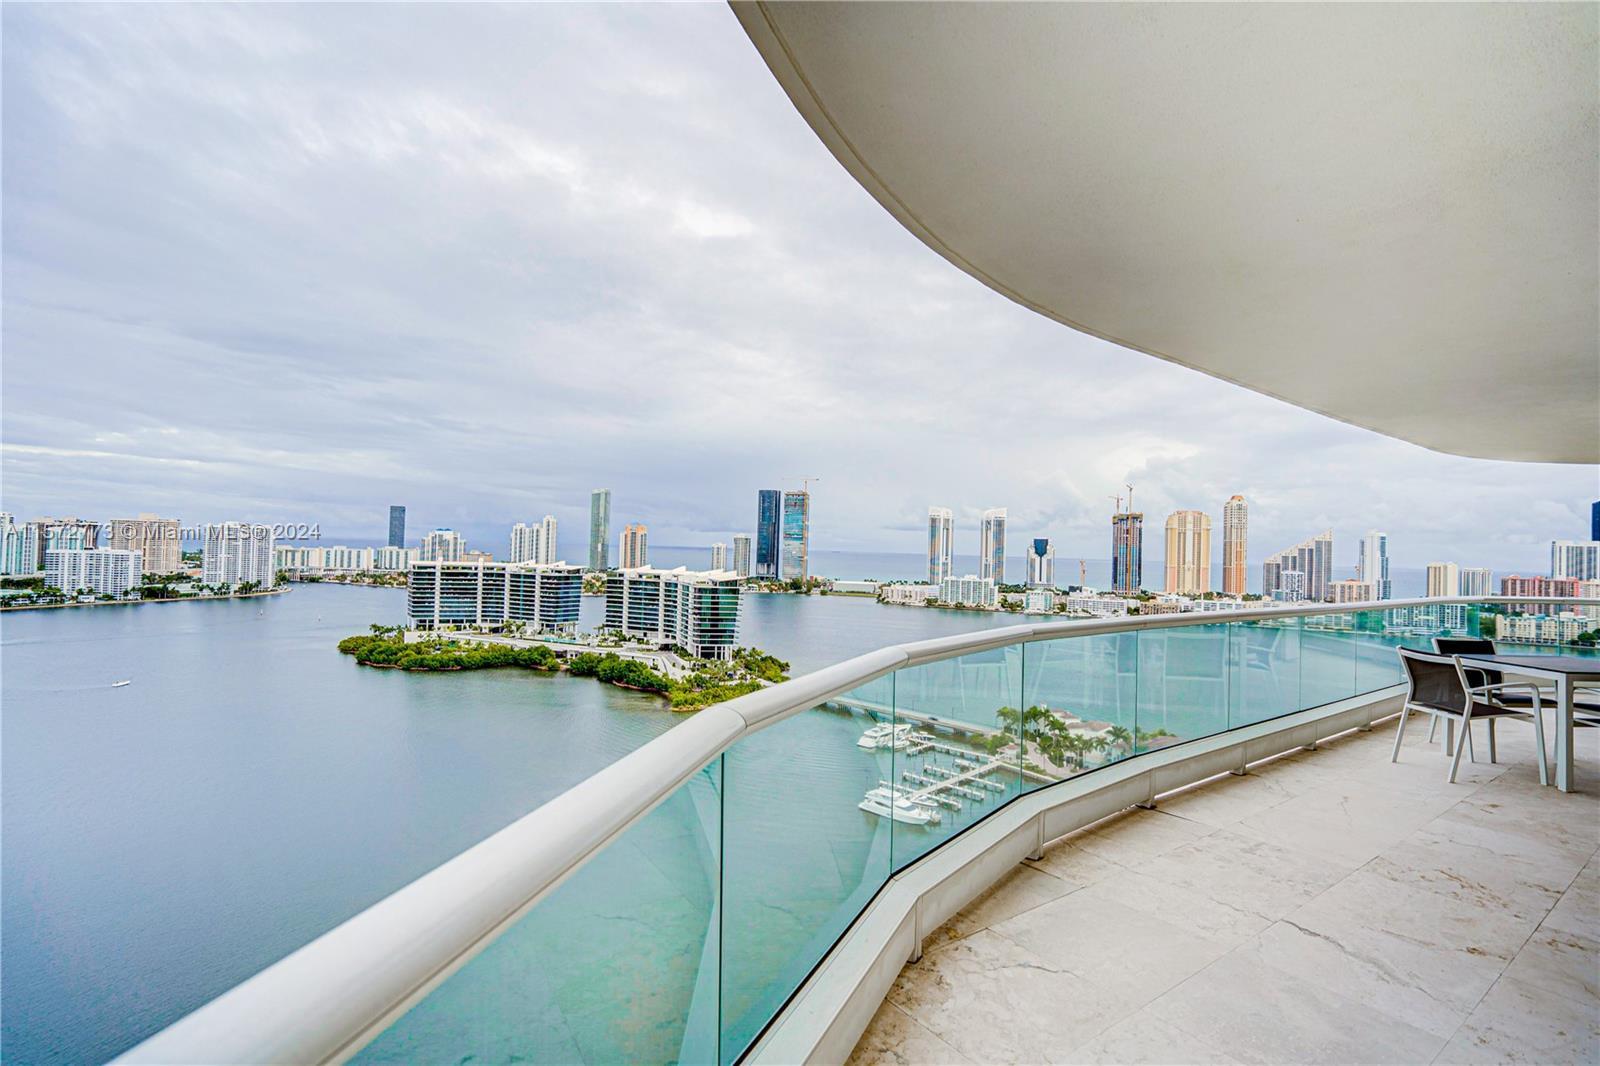 ENJOY MAGNIFICENT VIEWS FROM THIS 28TH FLOOR FACING THE BAY, SUNNY ISLES AND THE OCEAN, WHILE ENJOYI